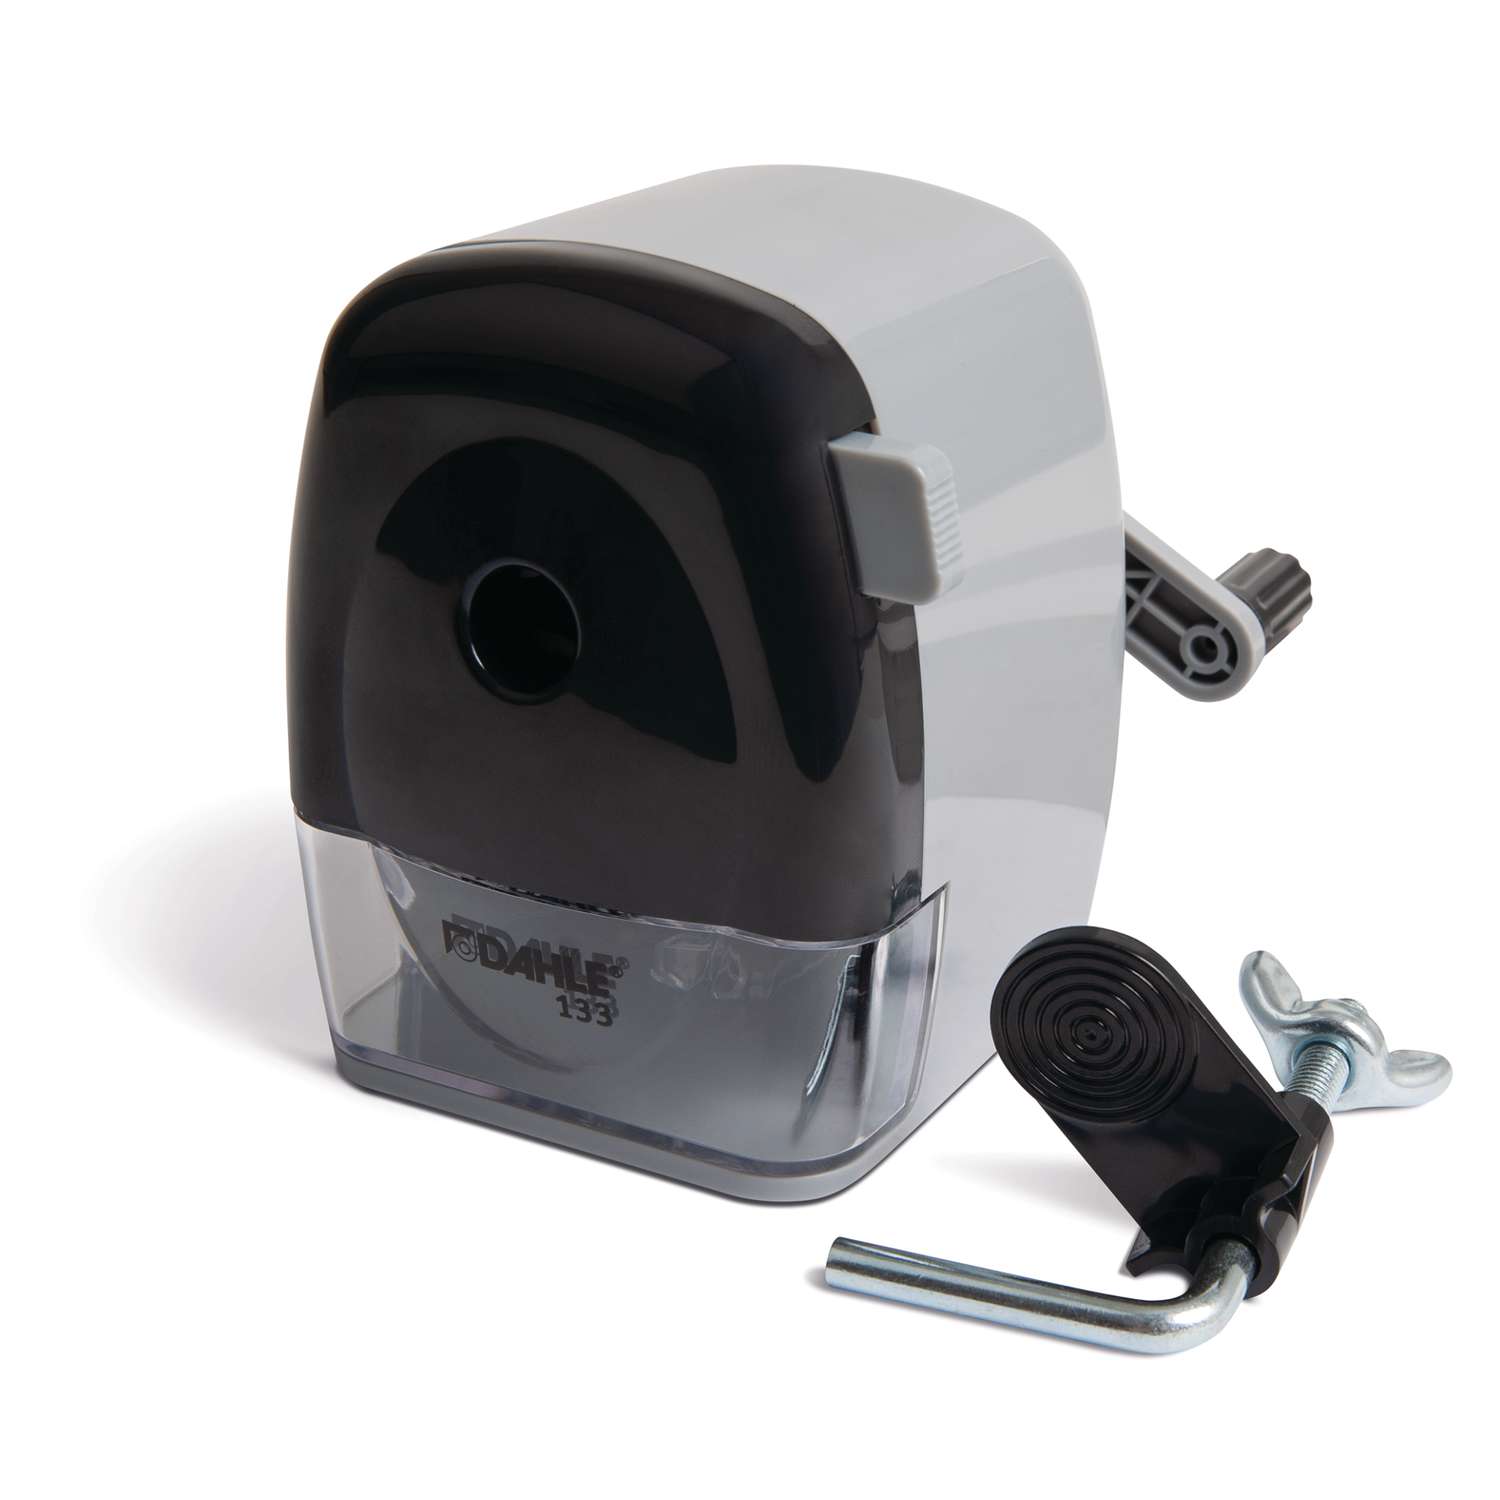 Dahle 133 Pencil Sharpener with Automatic Cutting System, Adjustable Point,  Accepts Standard Graphite or Oversized Artist Pencils